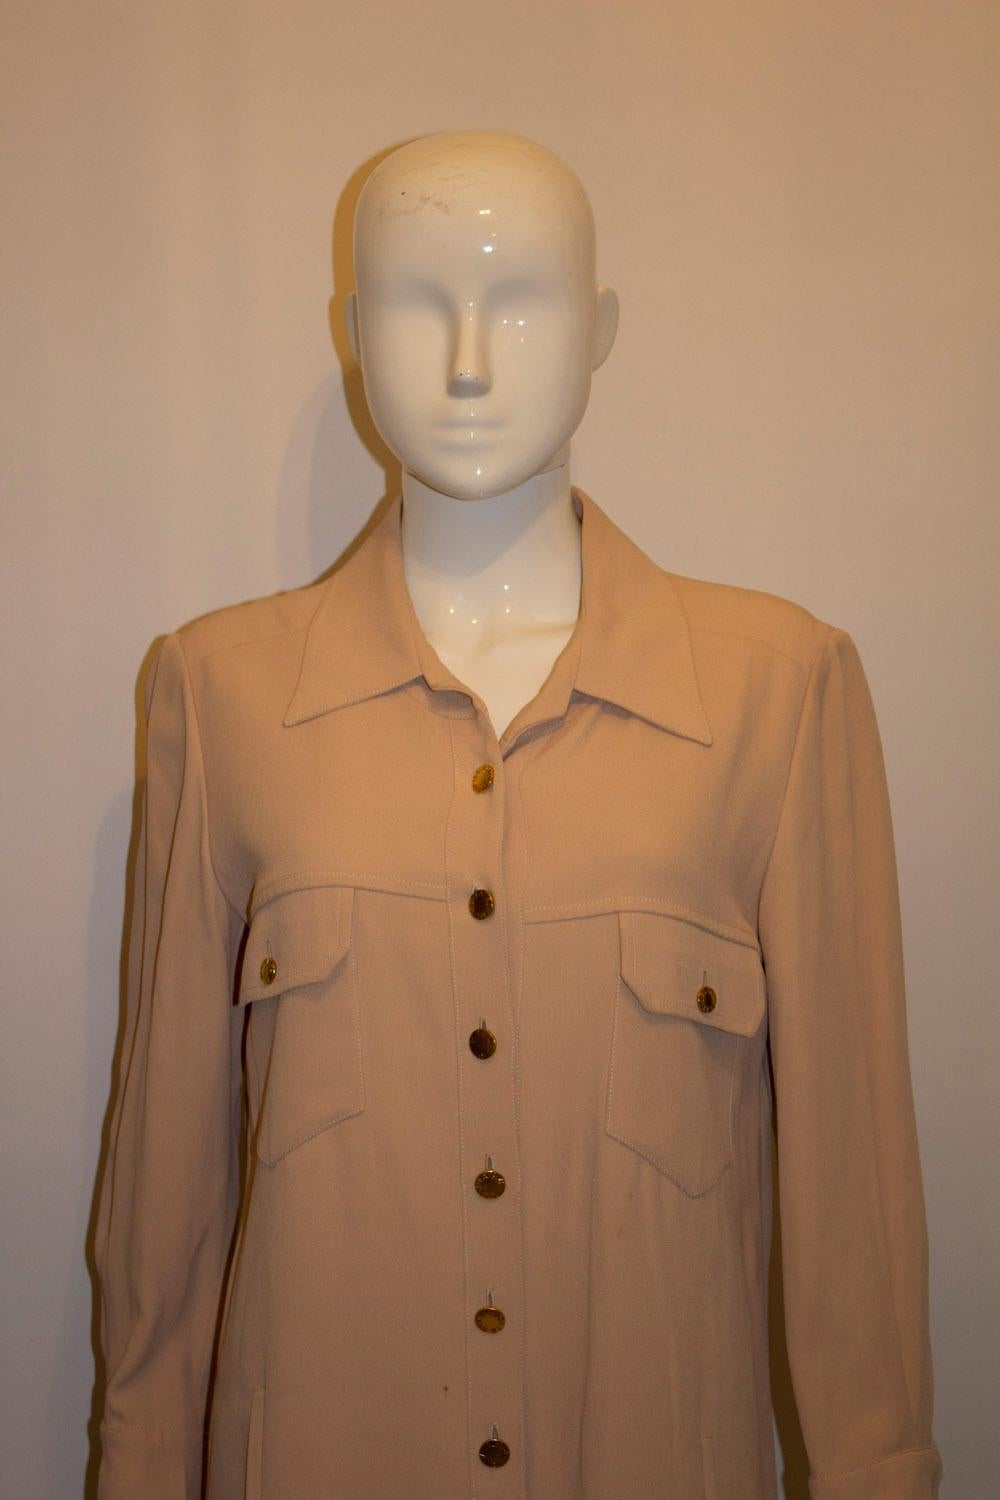 A chic vintage shirtdress by Sonia Rykiel, mainline. In a pale caramel colour, the dress has 2 breast pockets, 2 faux pockets lower down and a 10'' slit on either side. . It is unlined. 
EU size 40 measurements; Bust up to 39'', length 43''